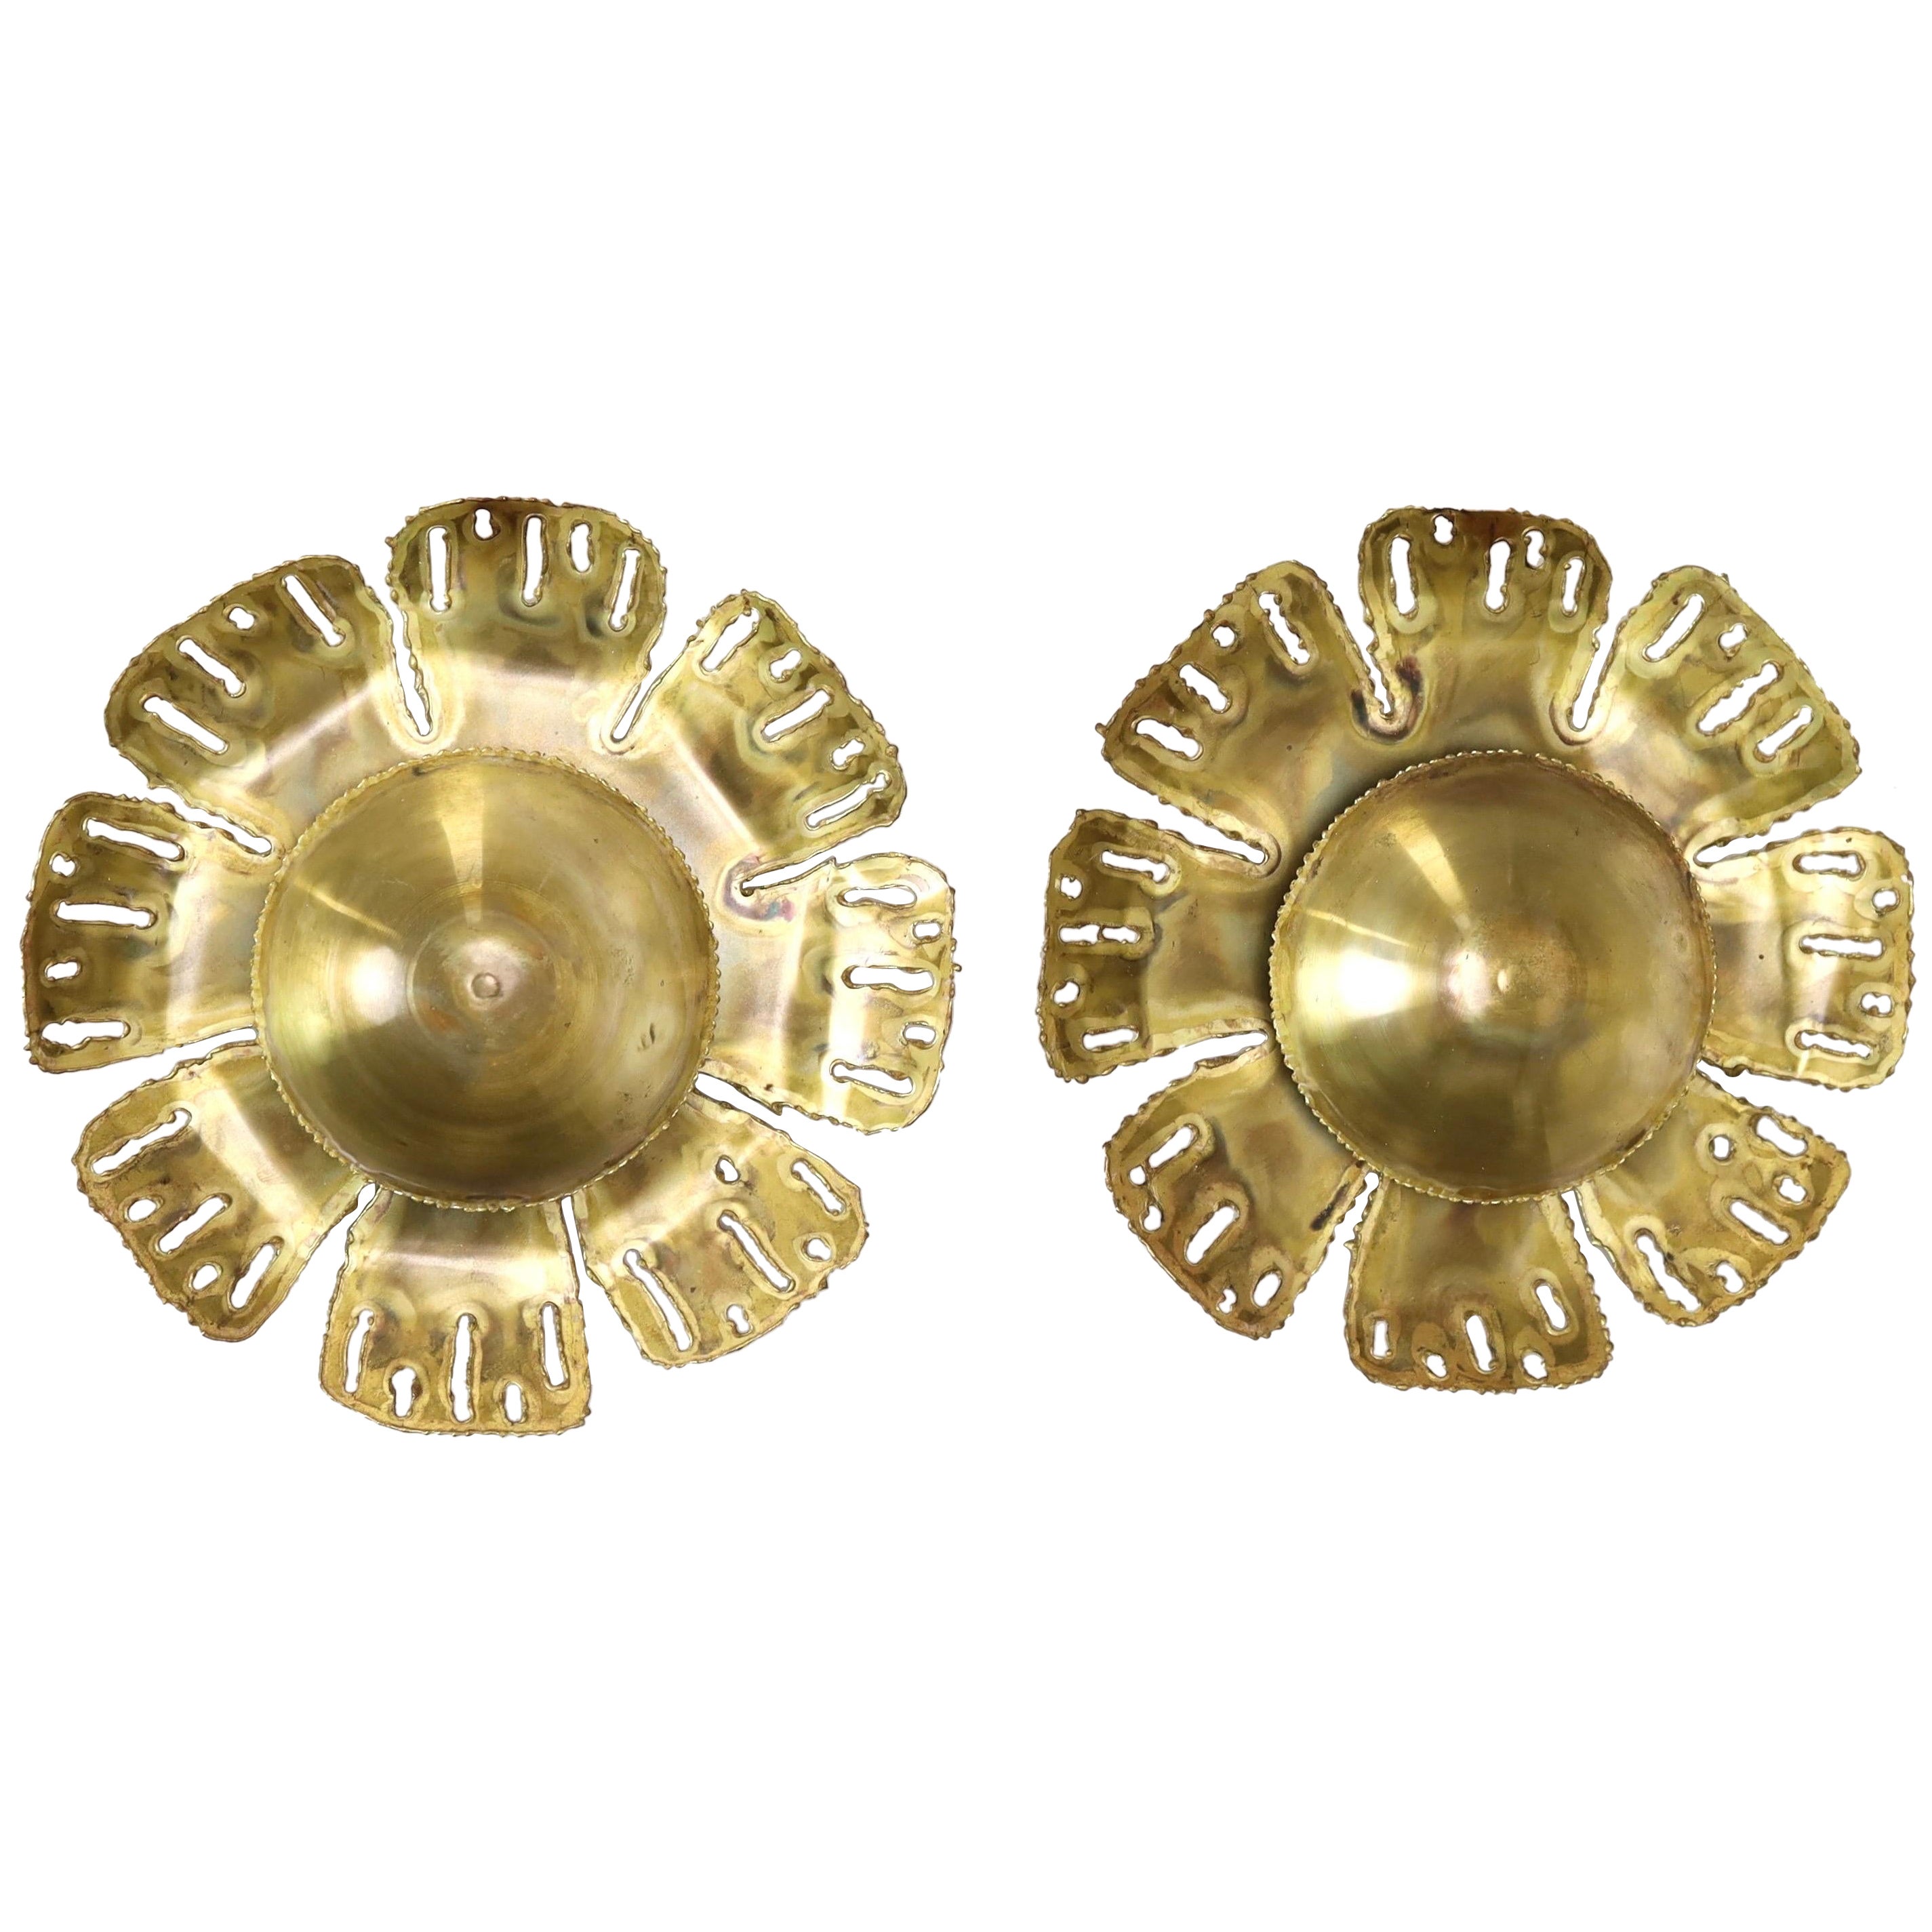 A set of Brass Wall Lamps by Svend Aage Holm Sorensen, 1960s, Denmark